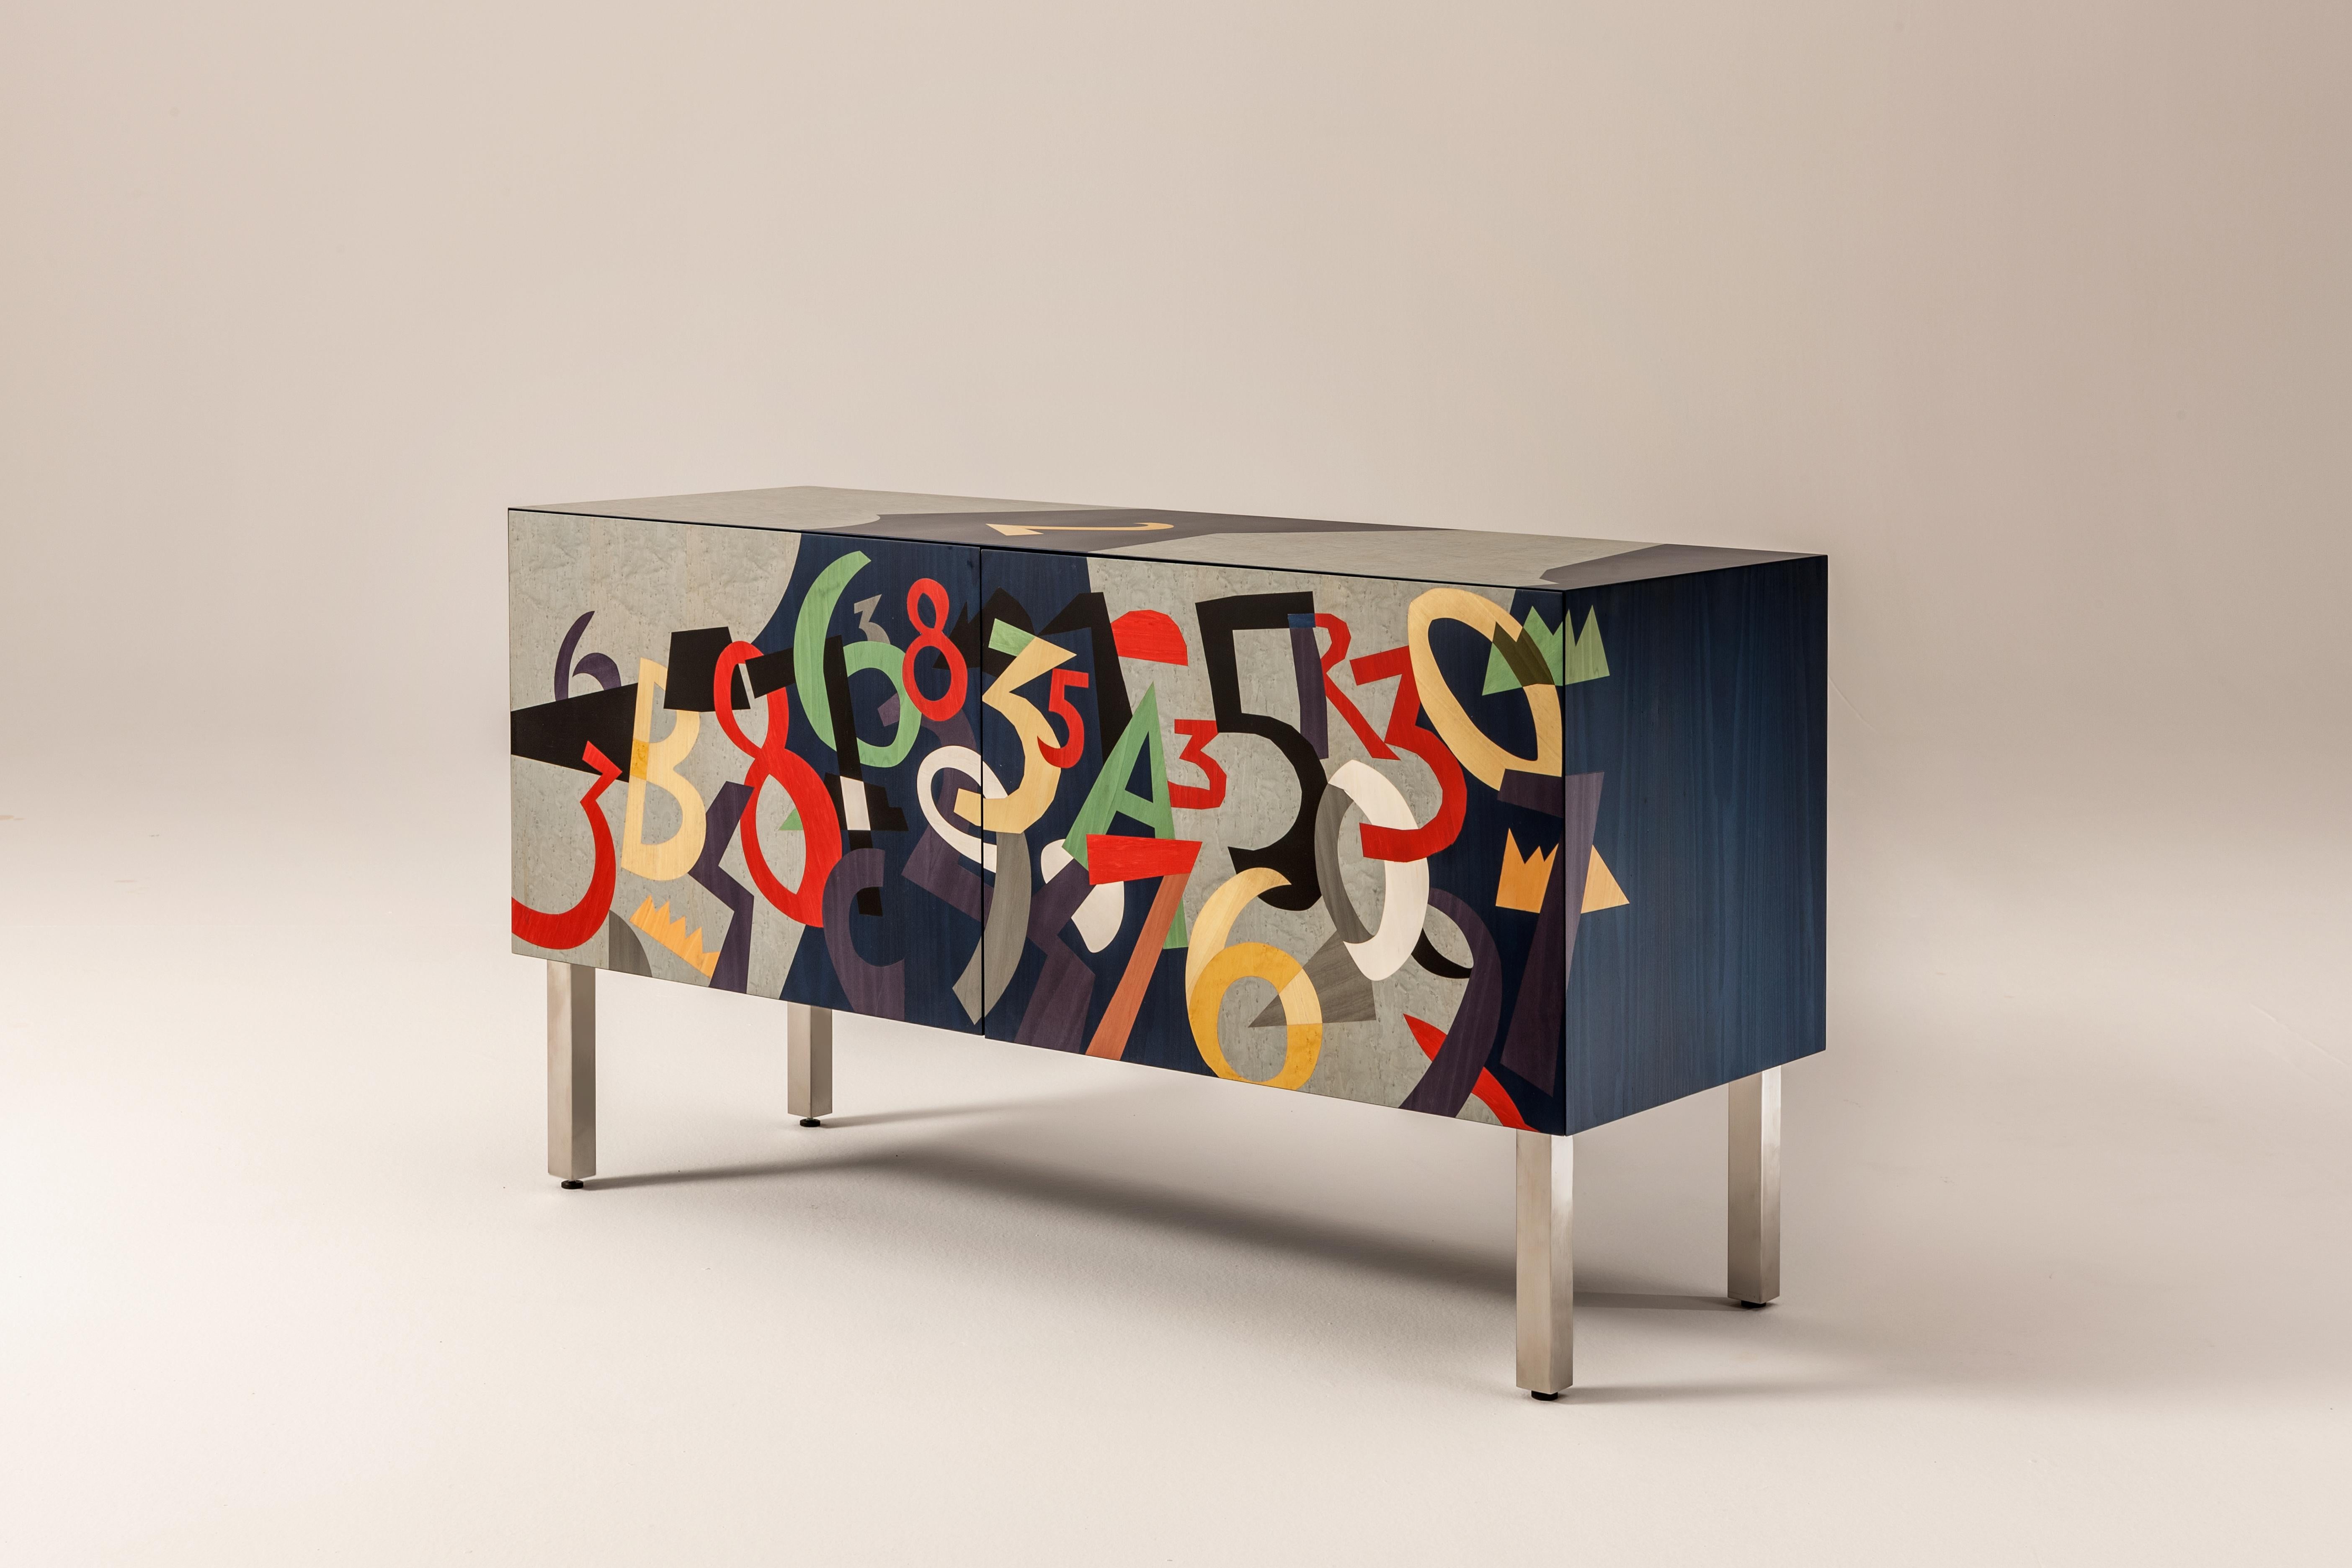 Sideboard with brushed metal legs and base, inlaid doors and structure. Fitted with push-pull doors and one internal shelf. It is also available in the hanging version.

FINISH:
Limited Edition Art Inlay

In Numeri, Pop artist Ugo Nespolo fills the